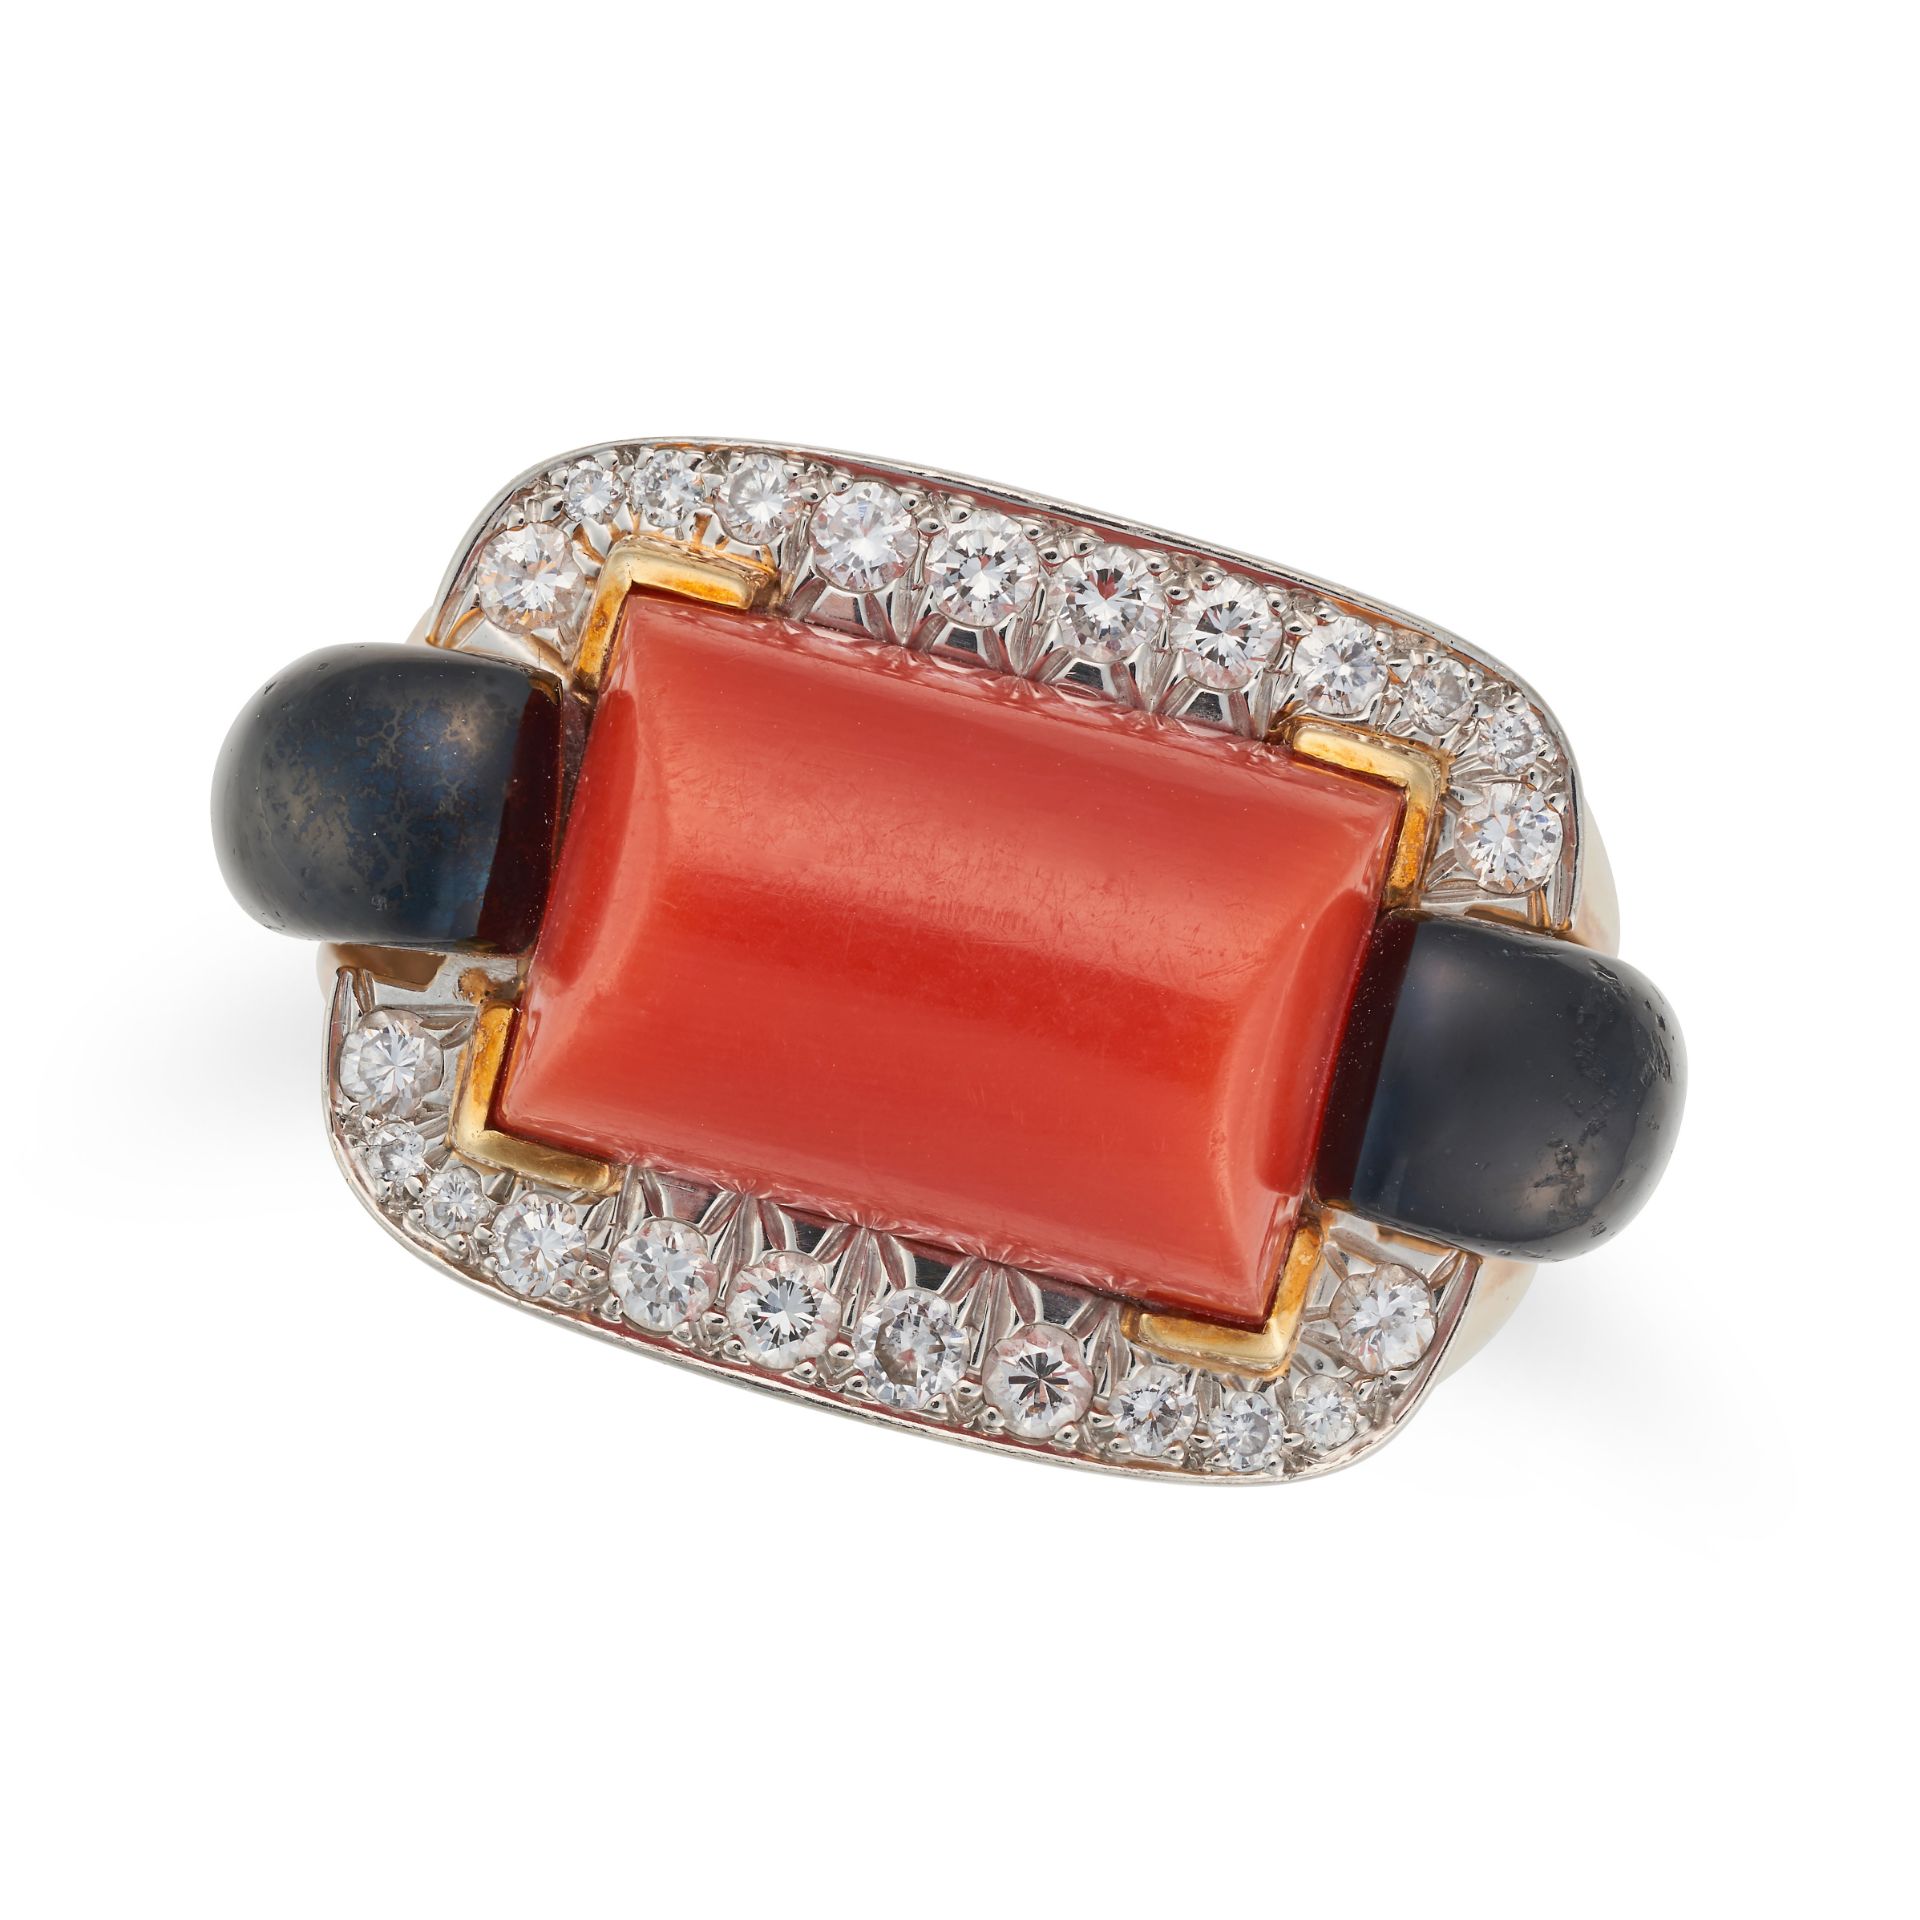 DAVID WEBB, A CORAL, DIAMOND AND ONYX RING set with a polished coral accented by polished onyx an... - Image 2 of 3